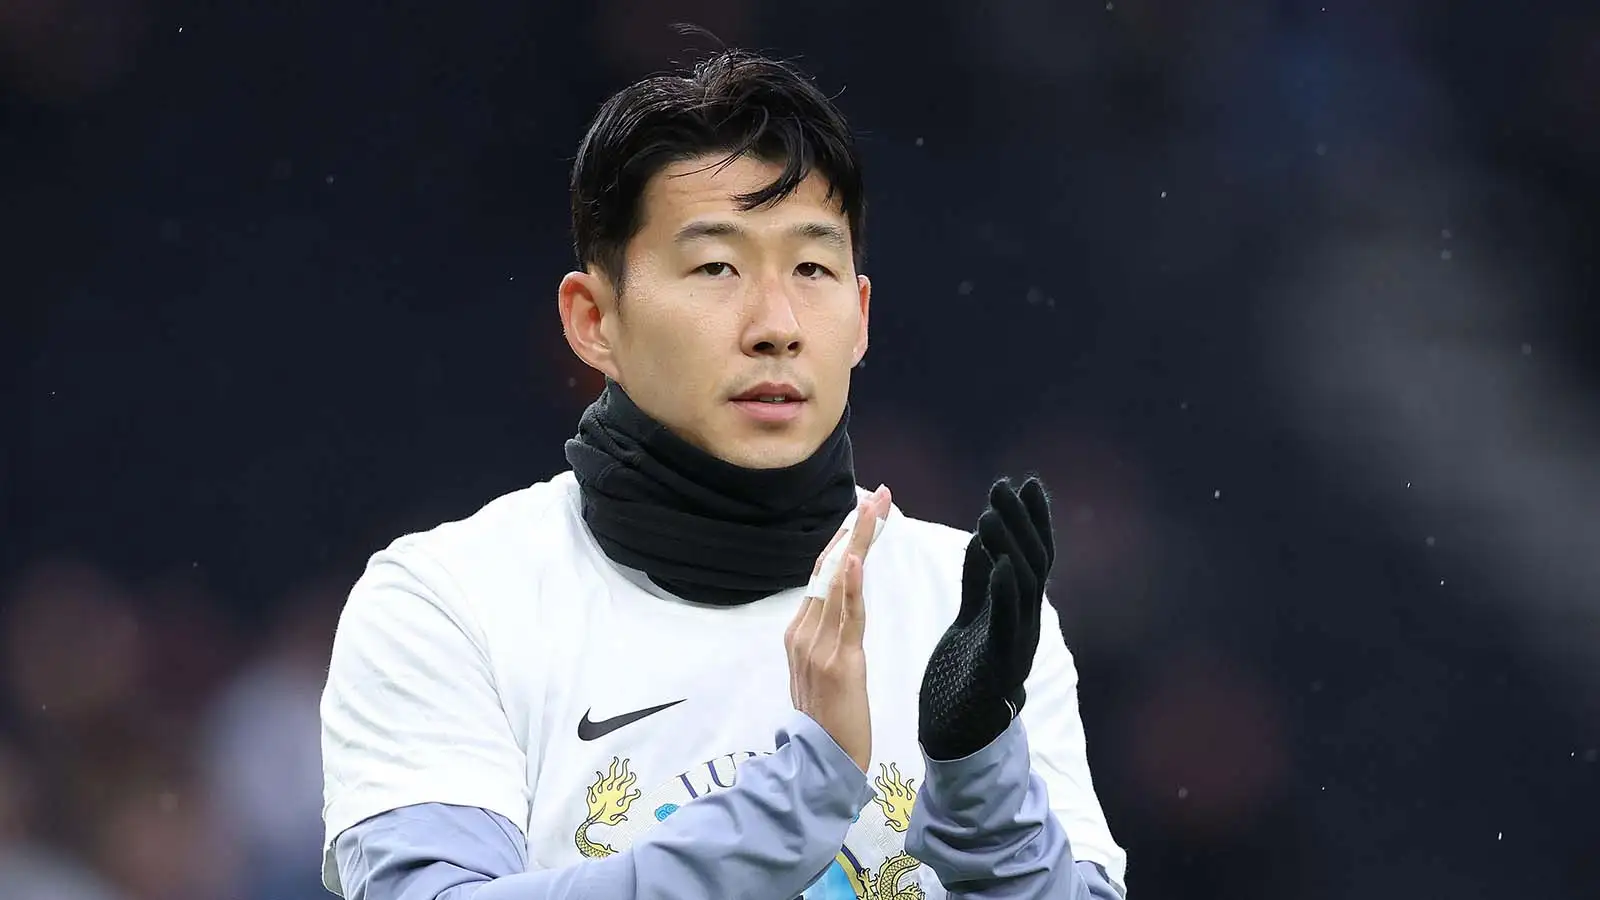 Son Heung-min dislocated his finger after heated ‘ping pong’ row with PSG star on international duty